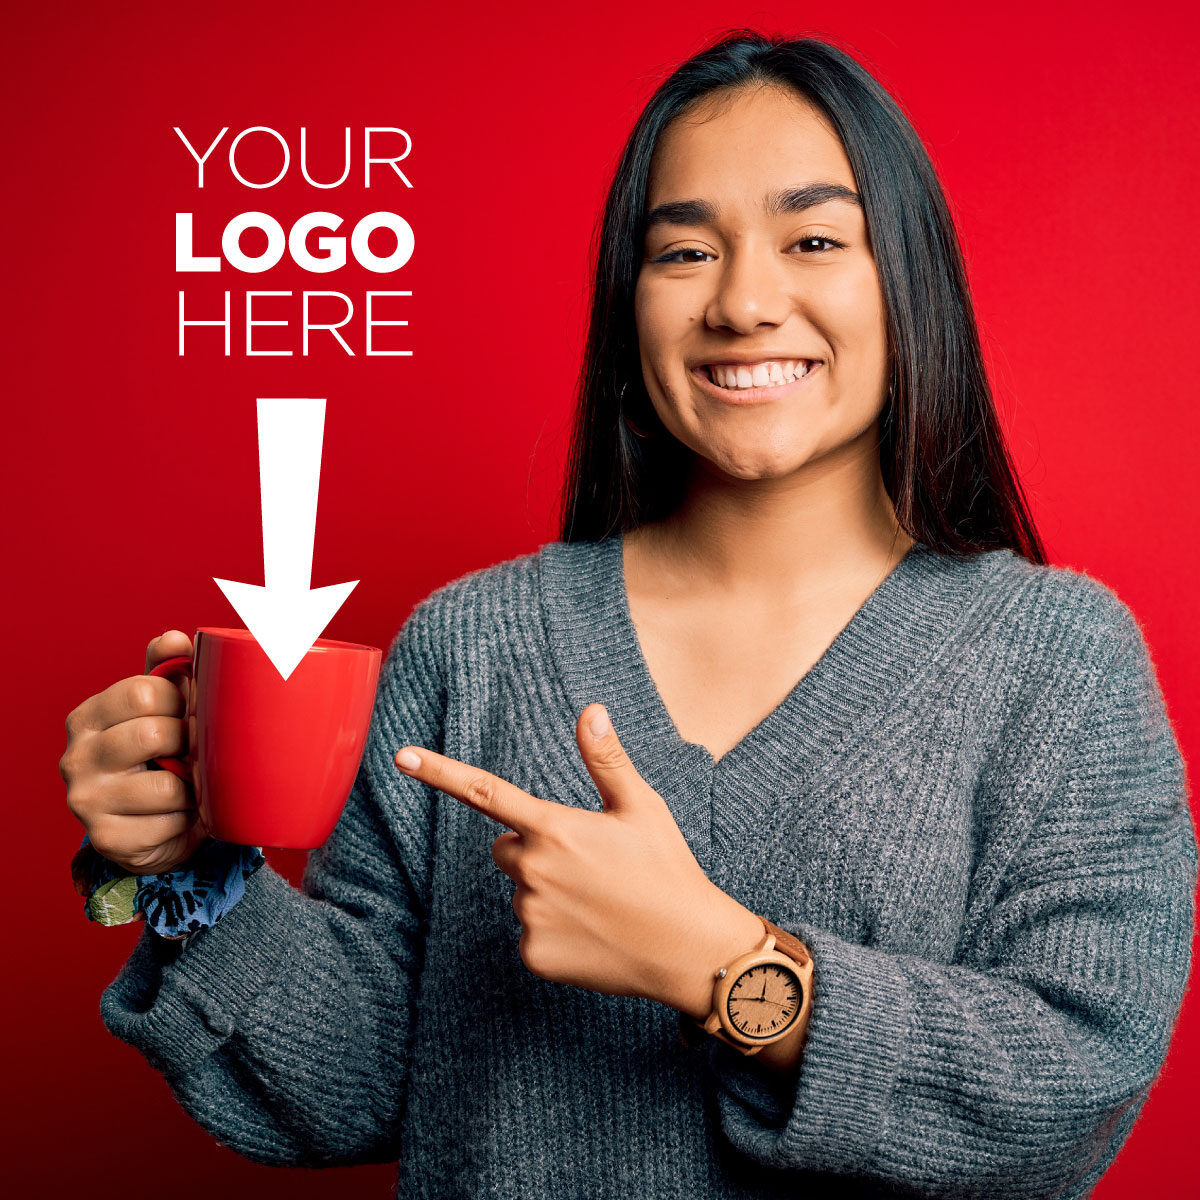 Young woman holding a mug - arrow pointing down with text "your logo here"